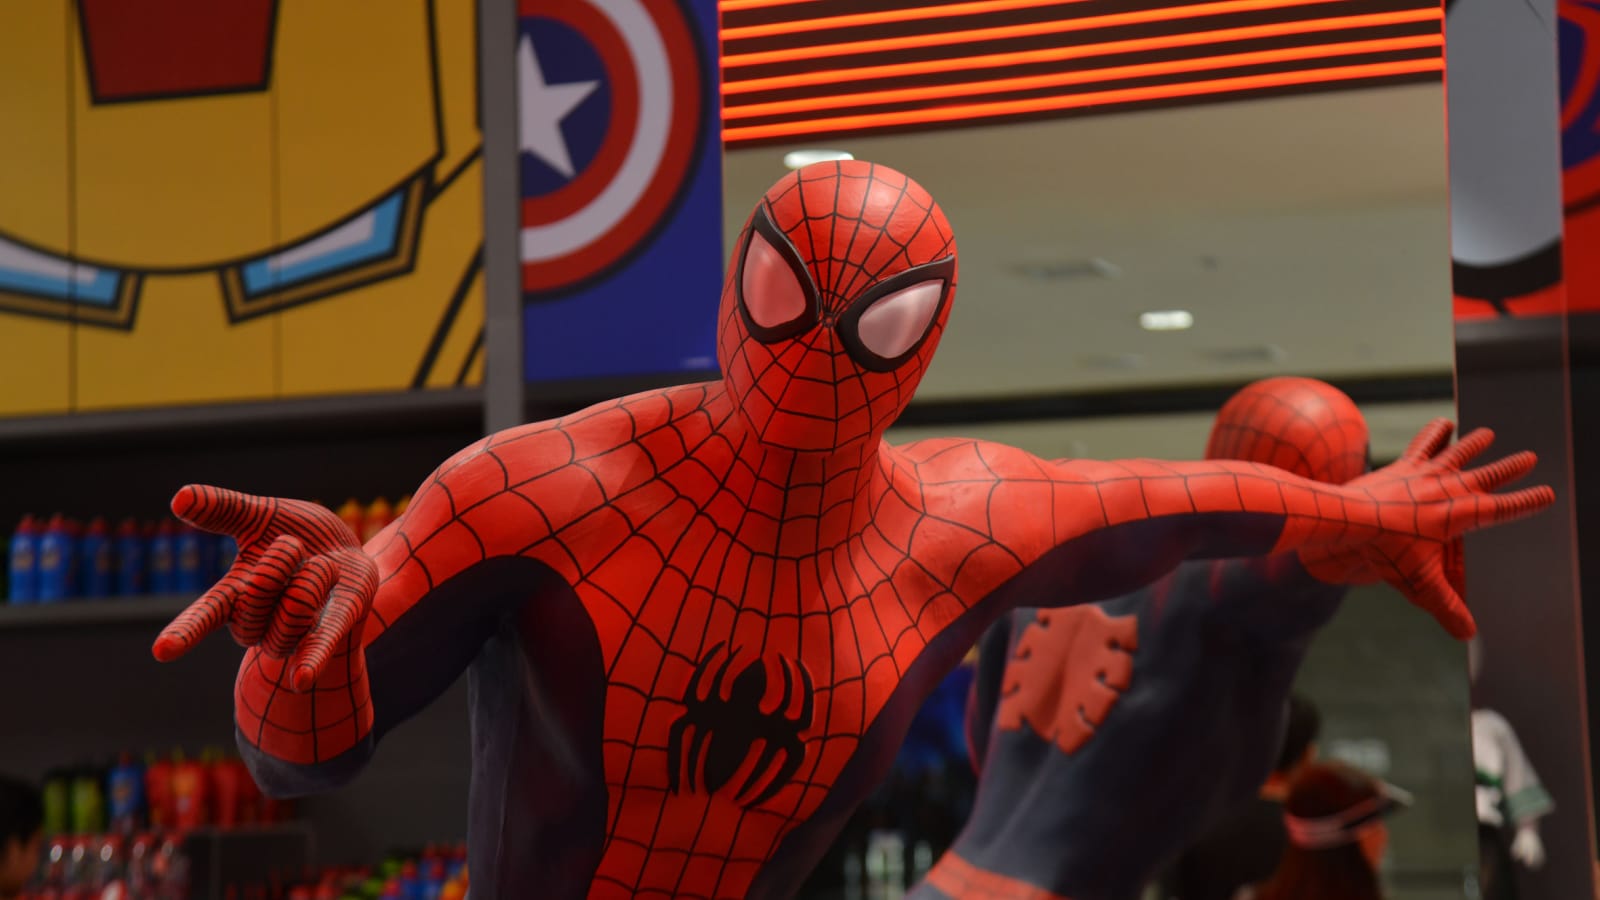 Bangkok, Thailand - July 8, 2018: Human Size Spiderman Statue Displays at The Marvel Experience Thailand Building